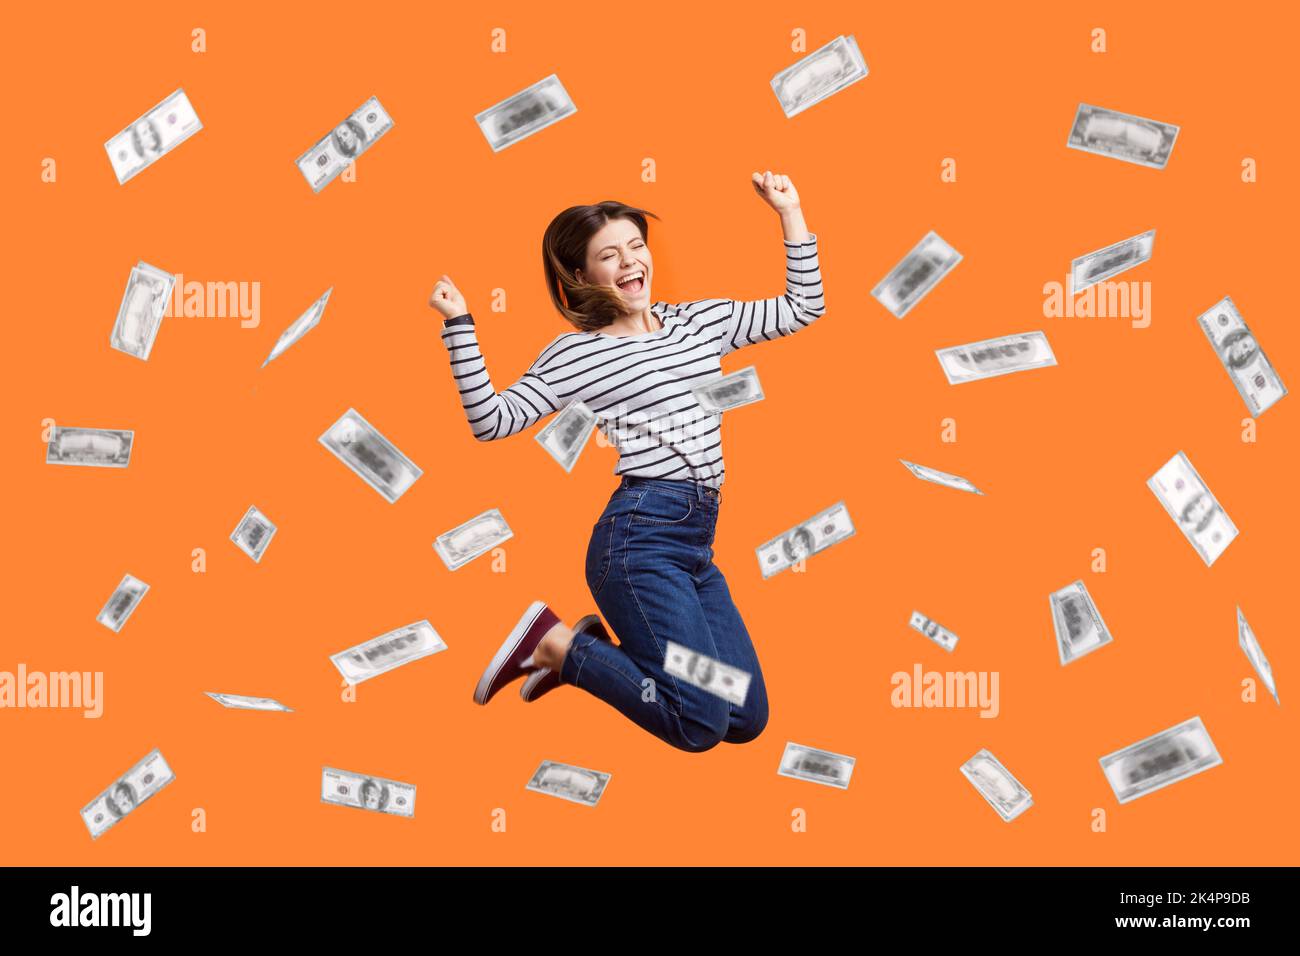 Portrait of satisfied excited woman jumping with clenched fist, celebrating winning lottery, flying in money rain, dollars falling. Indoor studio shot isolated on orange background. Stock Photo